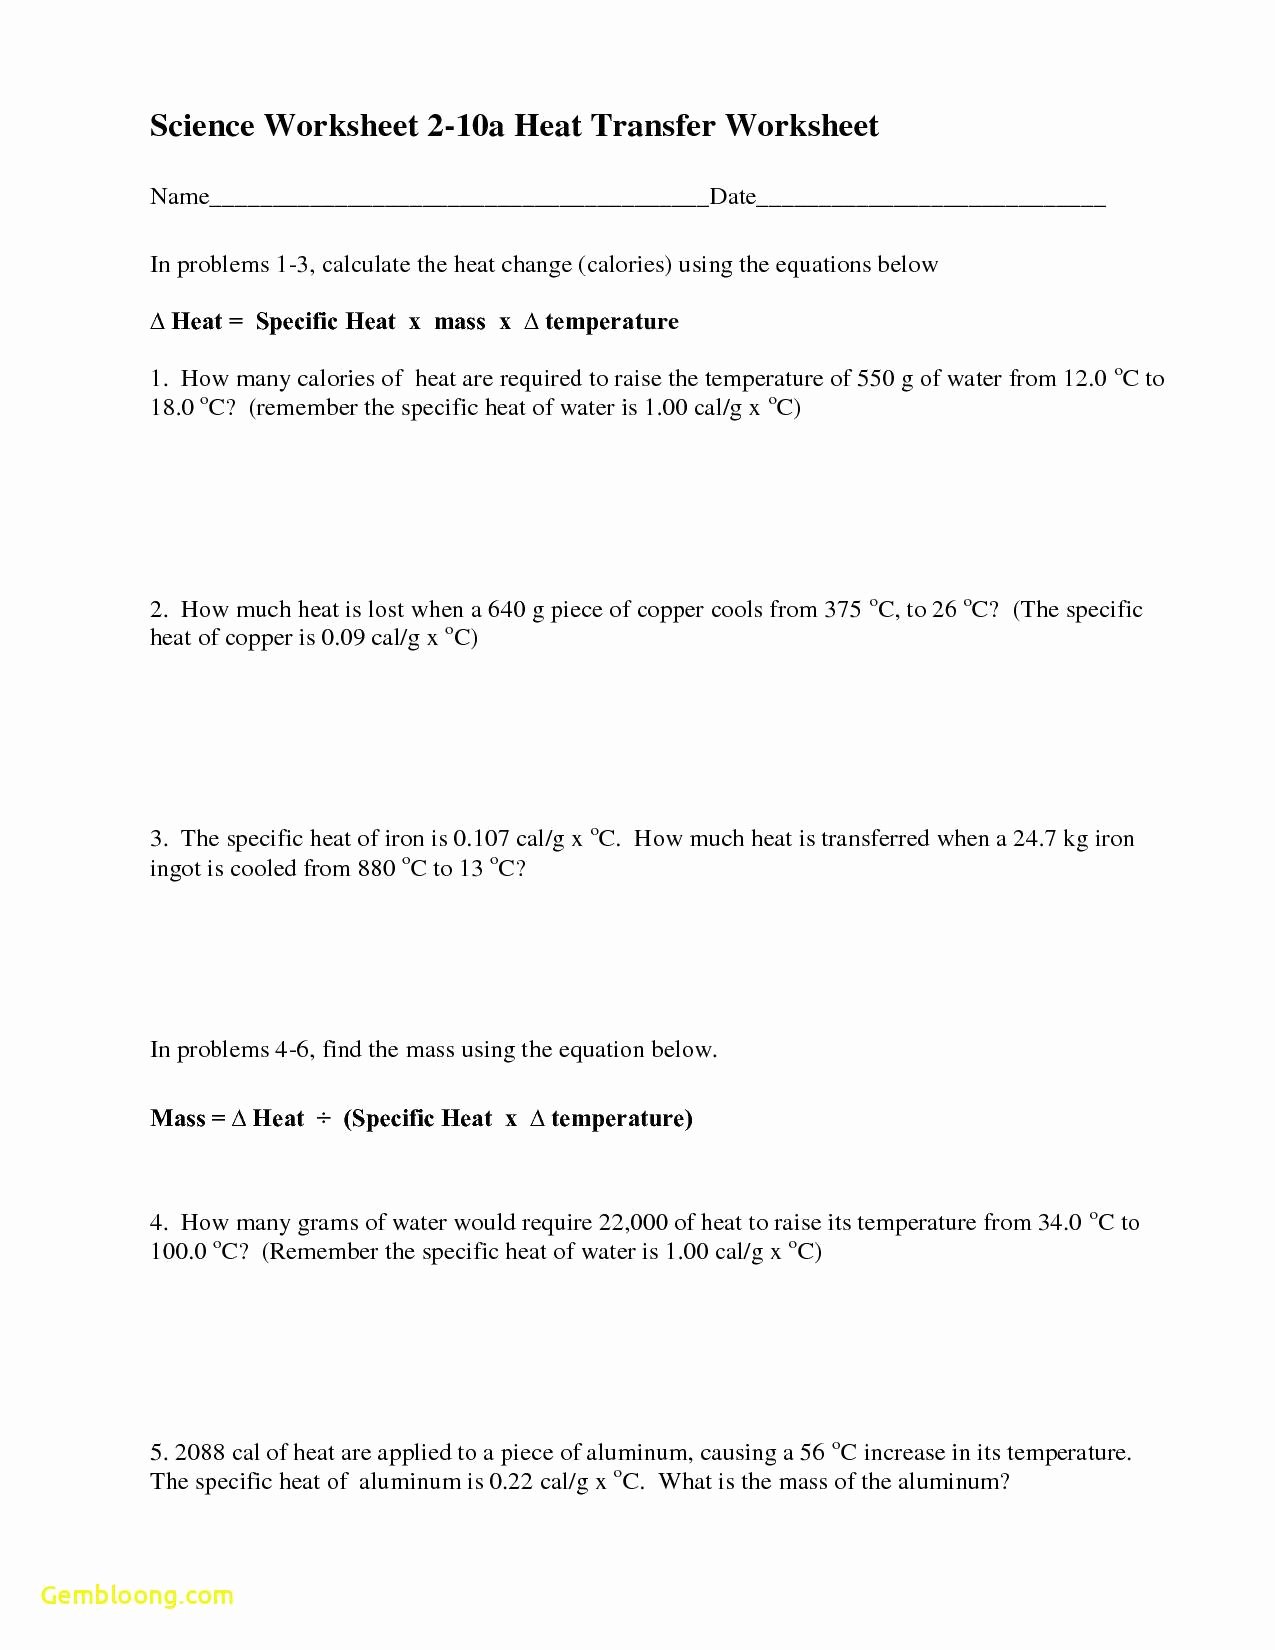 Methods Of Heat Transfer Worksheet New Energy Worksheet 2 Conduction Convection and Radiation